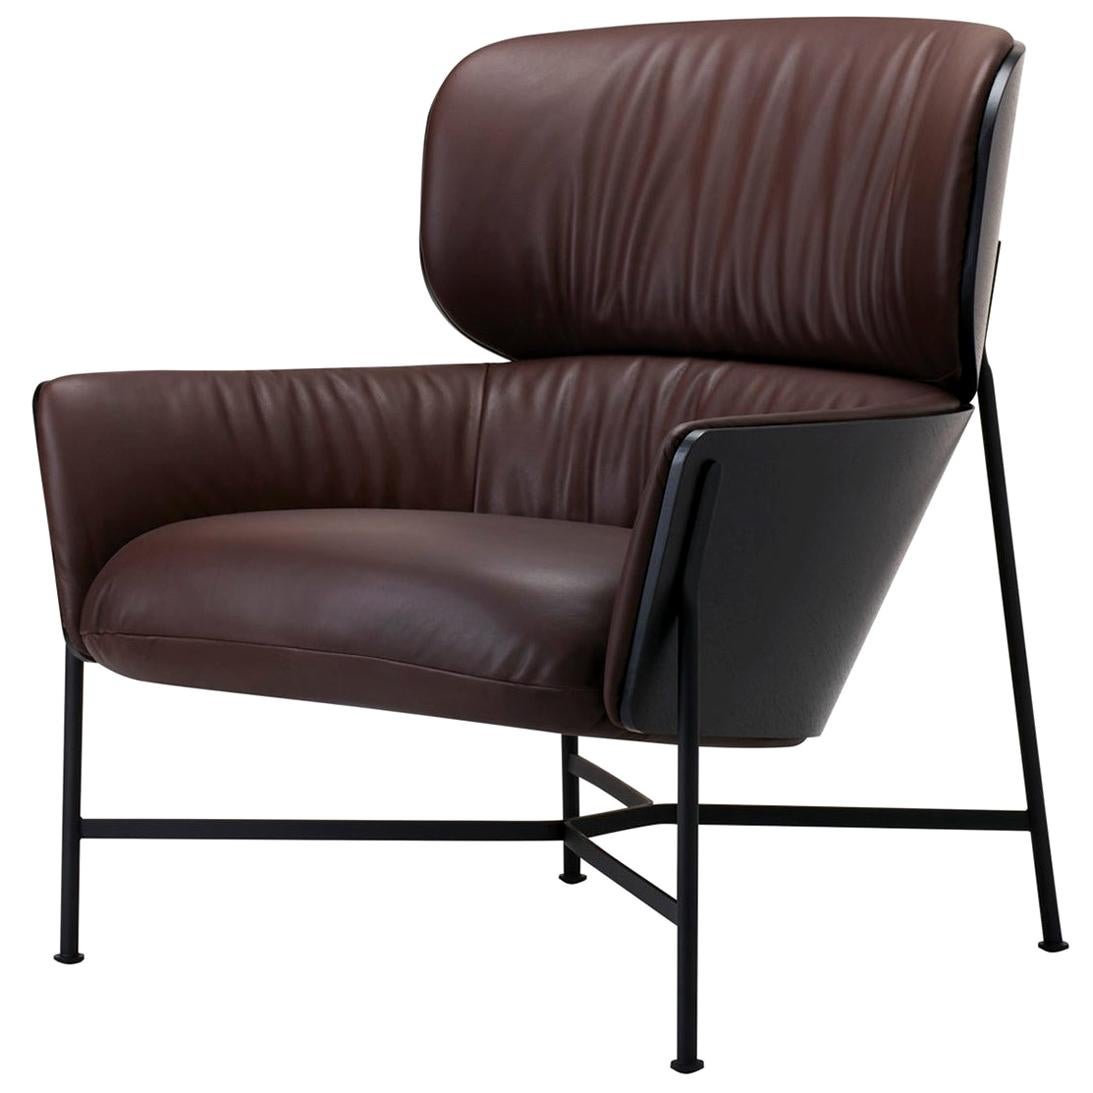 SP01 Caristo Low Back Armchair in Dark Brown Leather, Made in Italy